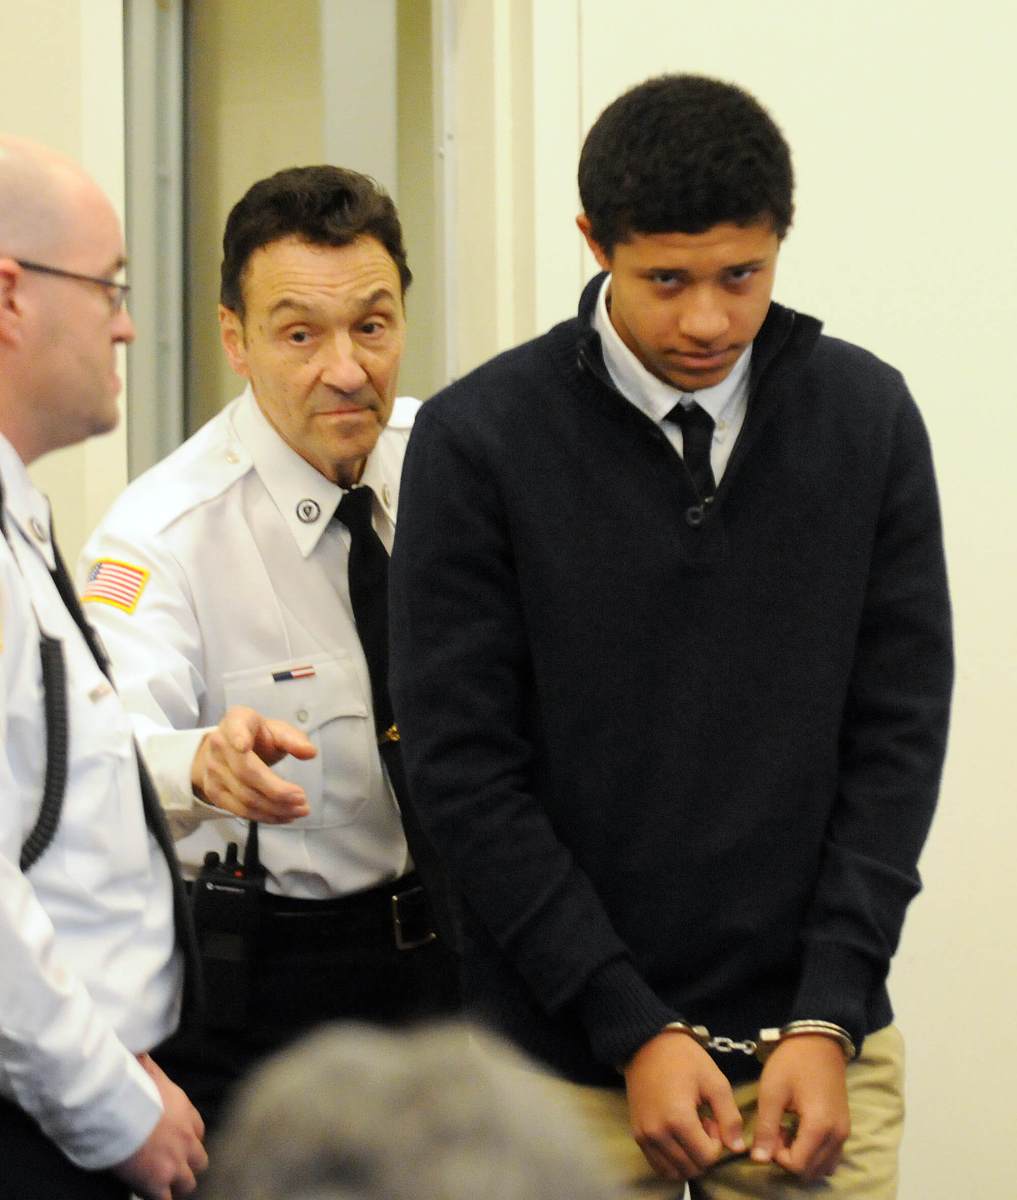 Chism trial on hold after teen melted down, claimed he was ‘ready to explode’